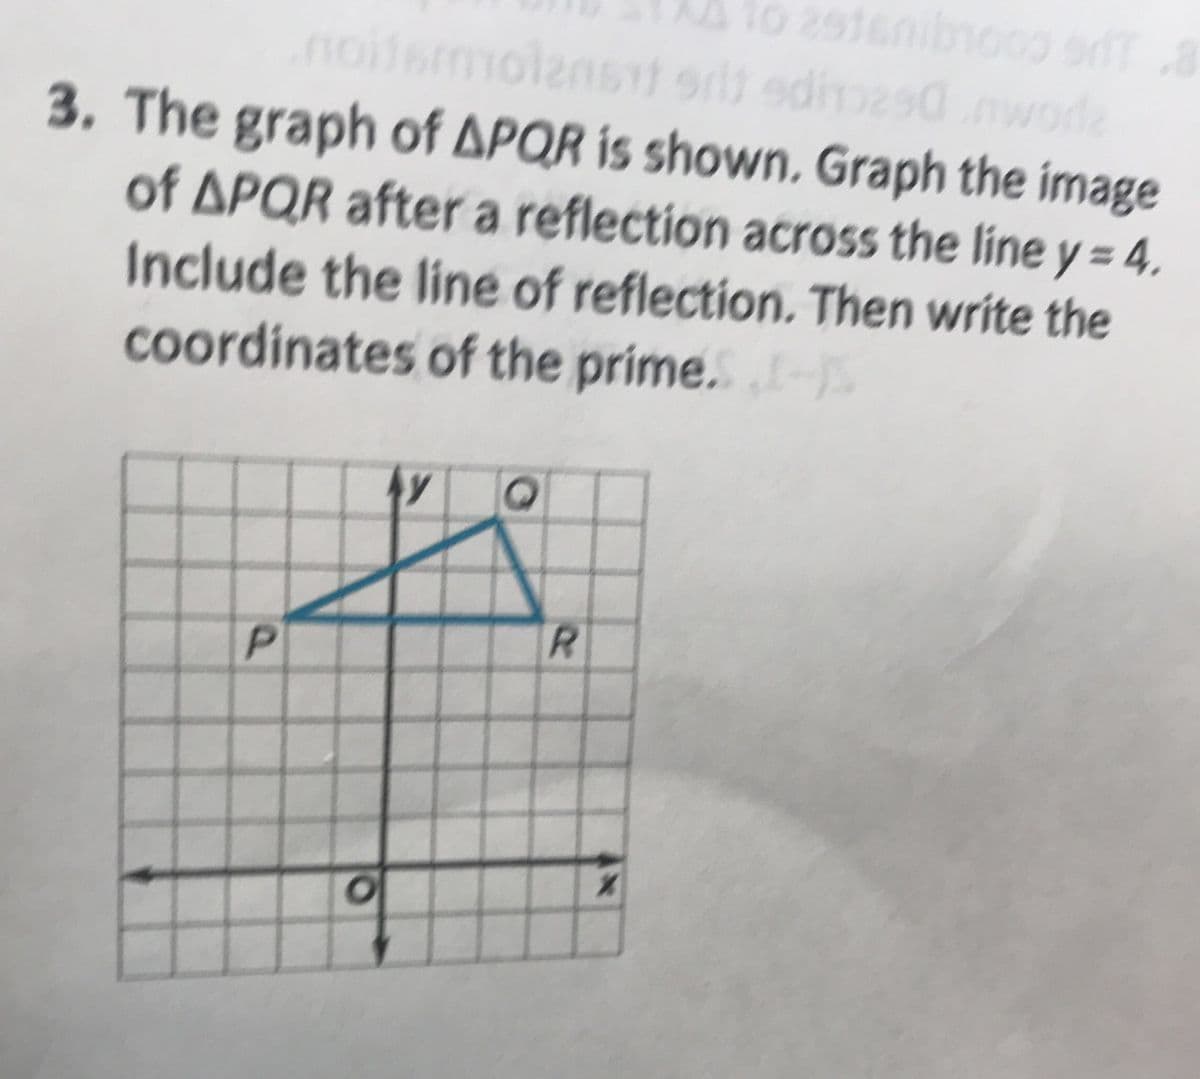 lo 2916nibnooo or
iemolenst srlt edimesdmwode
3. The graph of APQR is shown, Graph the image
of APQR after a reflection across the line y= 4
%3D
Include the line of reflection. Then write the
coordinates of the prime. S
P.
